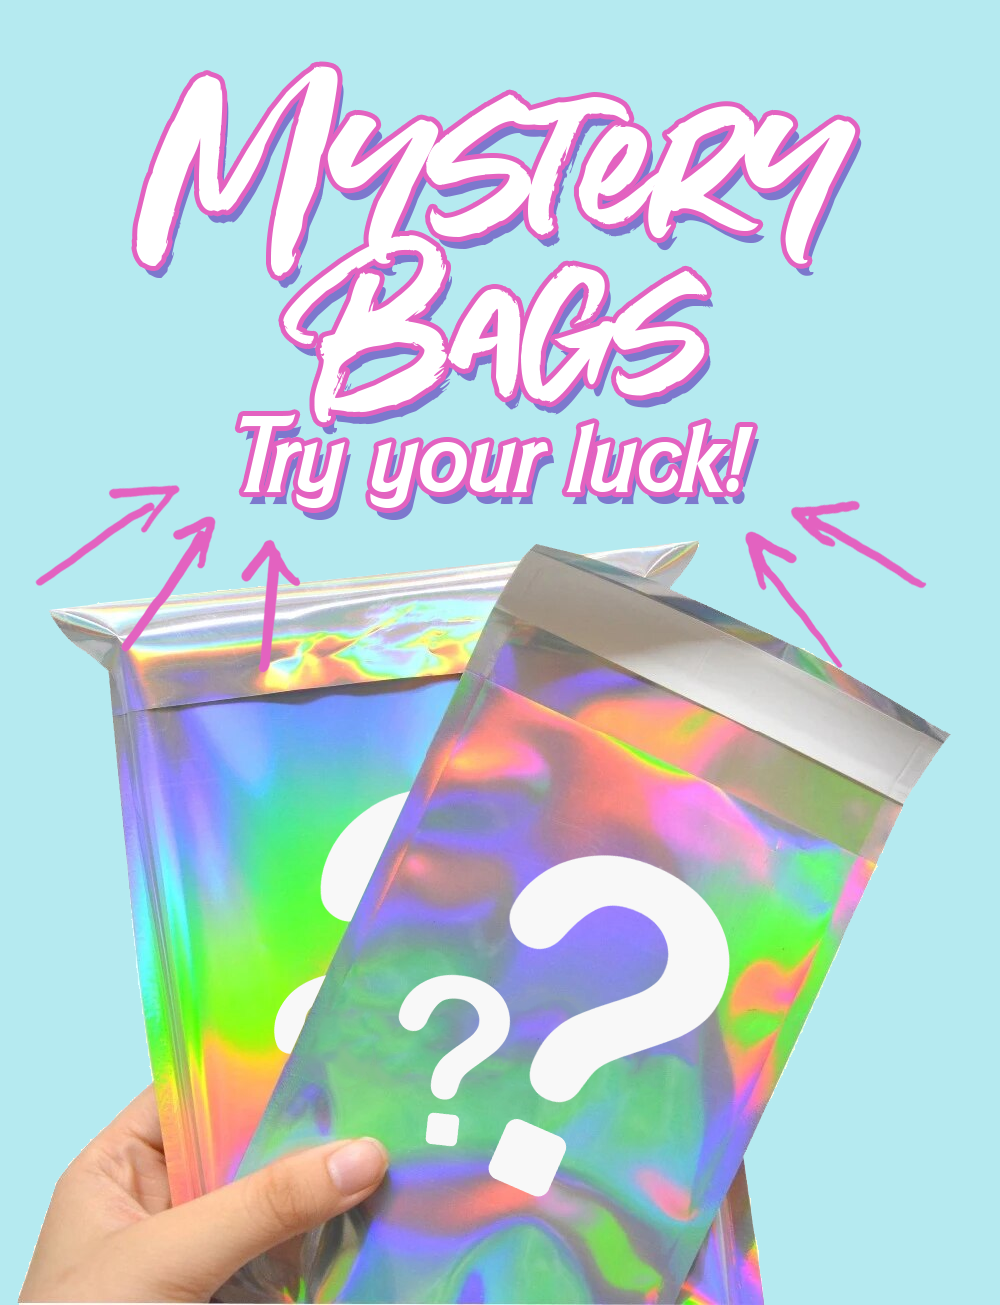 ✩°｡ Mystery Bags! ｡°✩